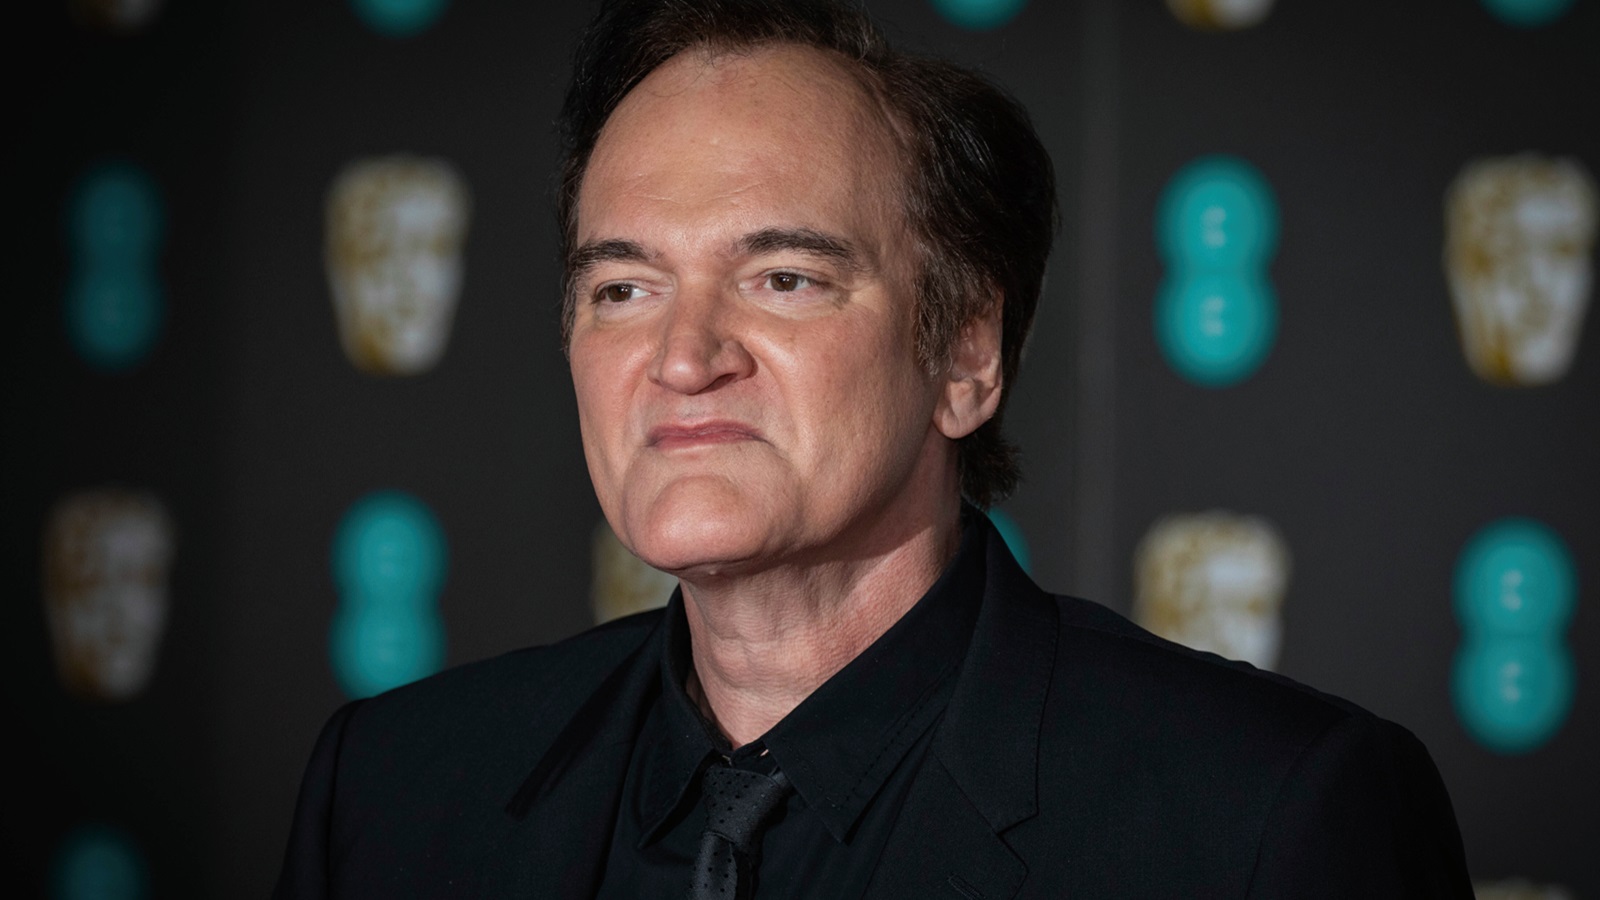 Quentin Tarantino visits the Israeli army and the inhabitants of the areas affected by Hamas